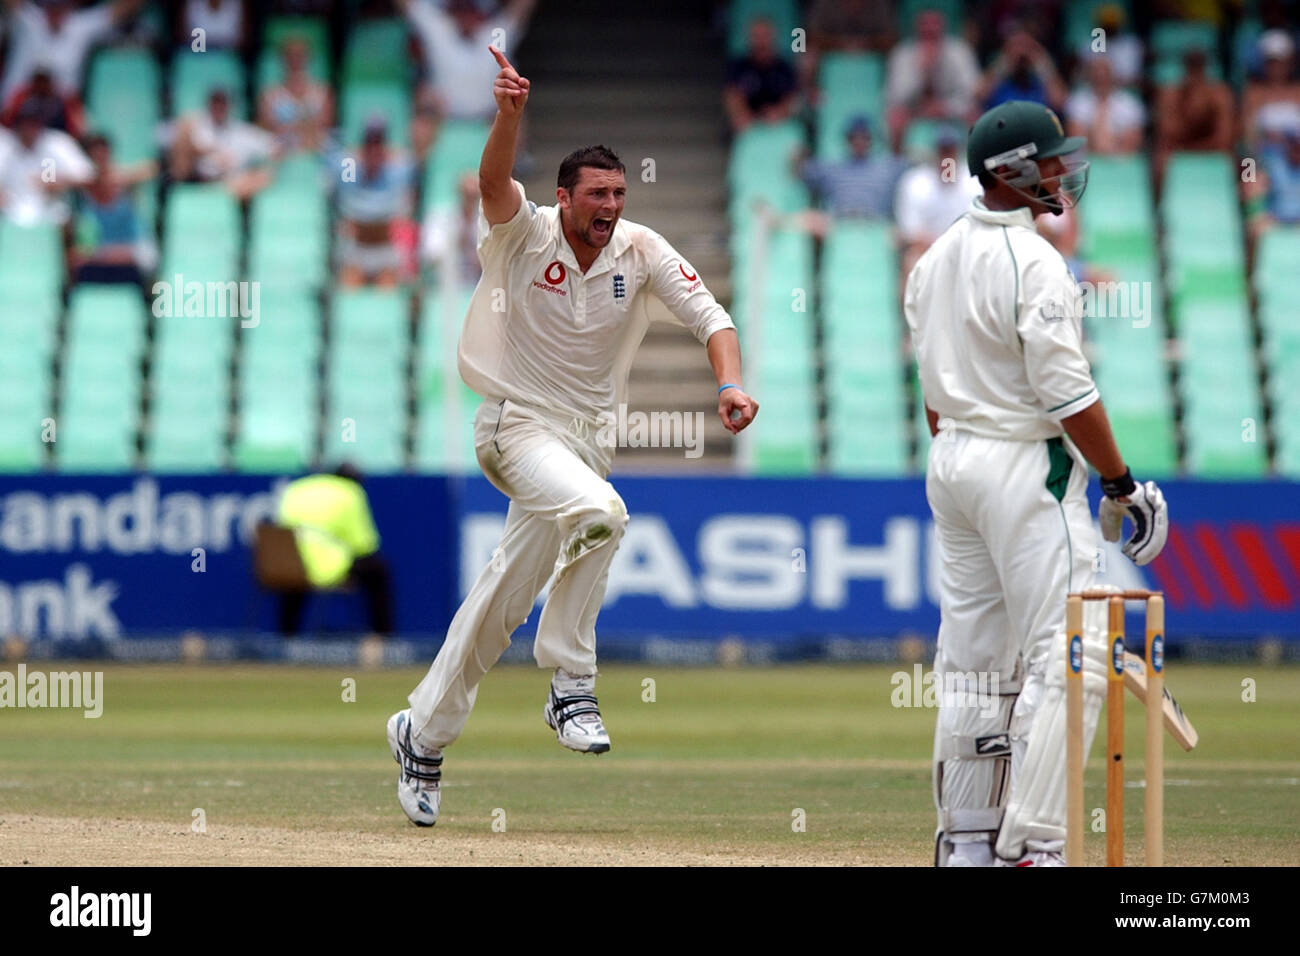 South Africa v England - Second Test Match - Kingsmead, Durban, South ...